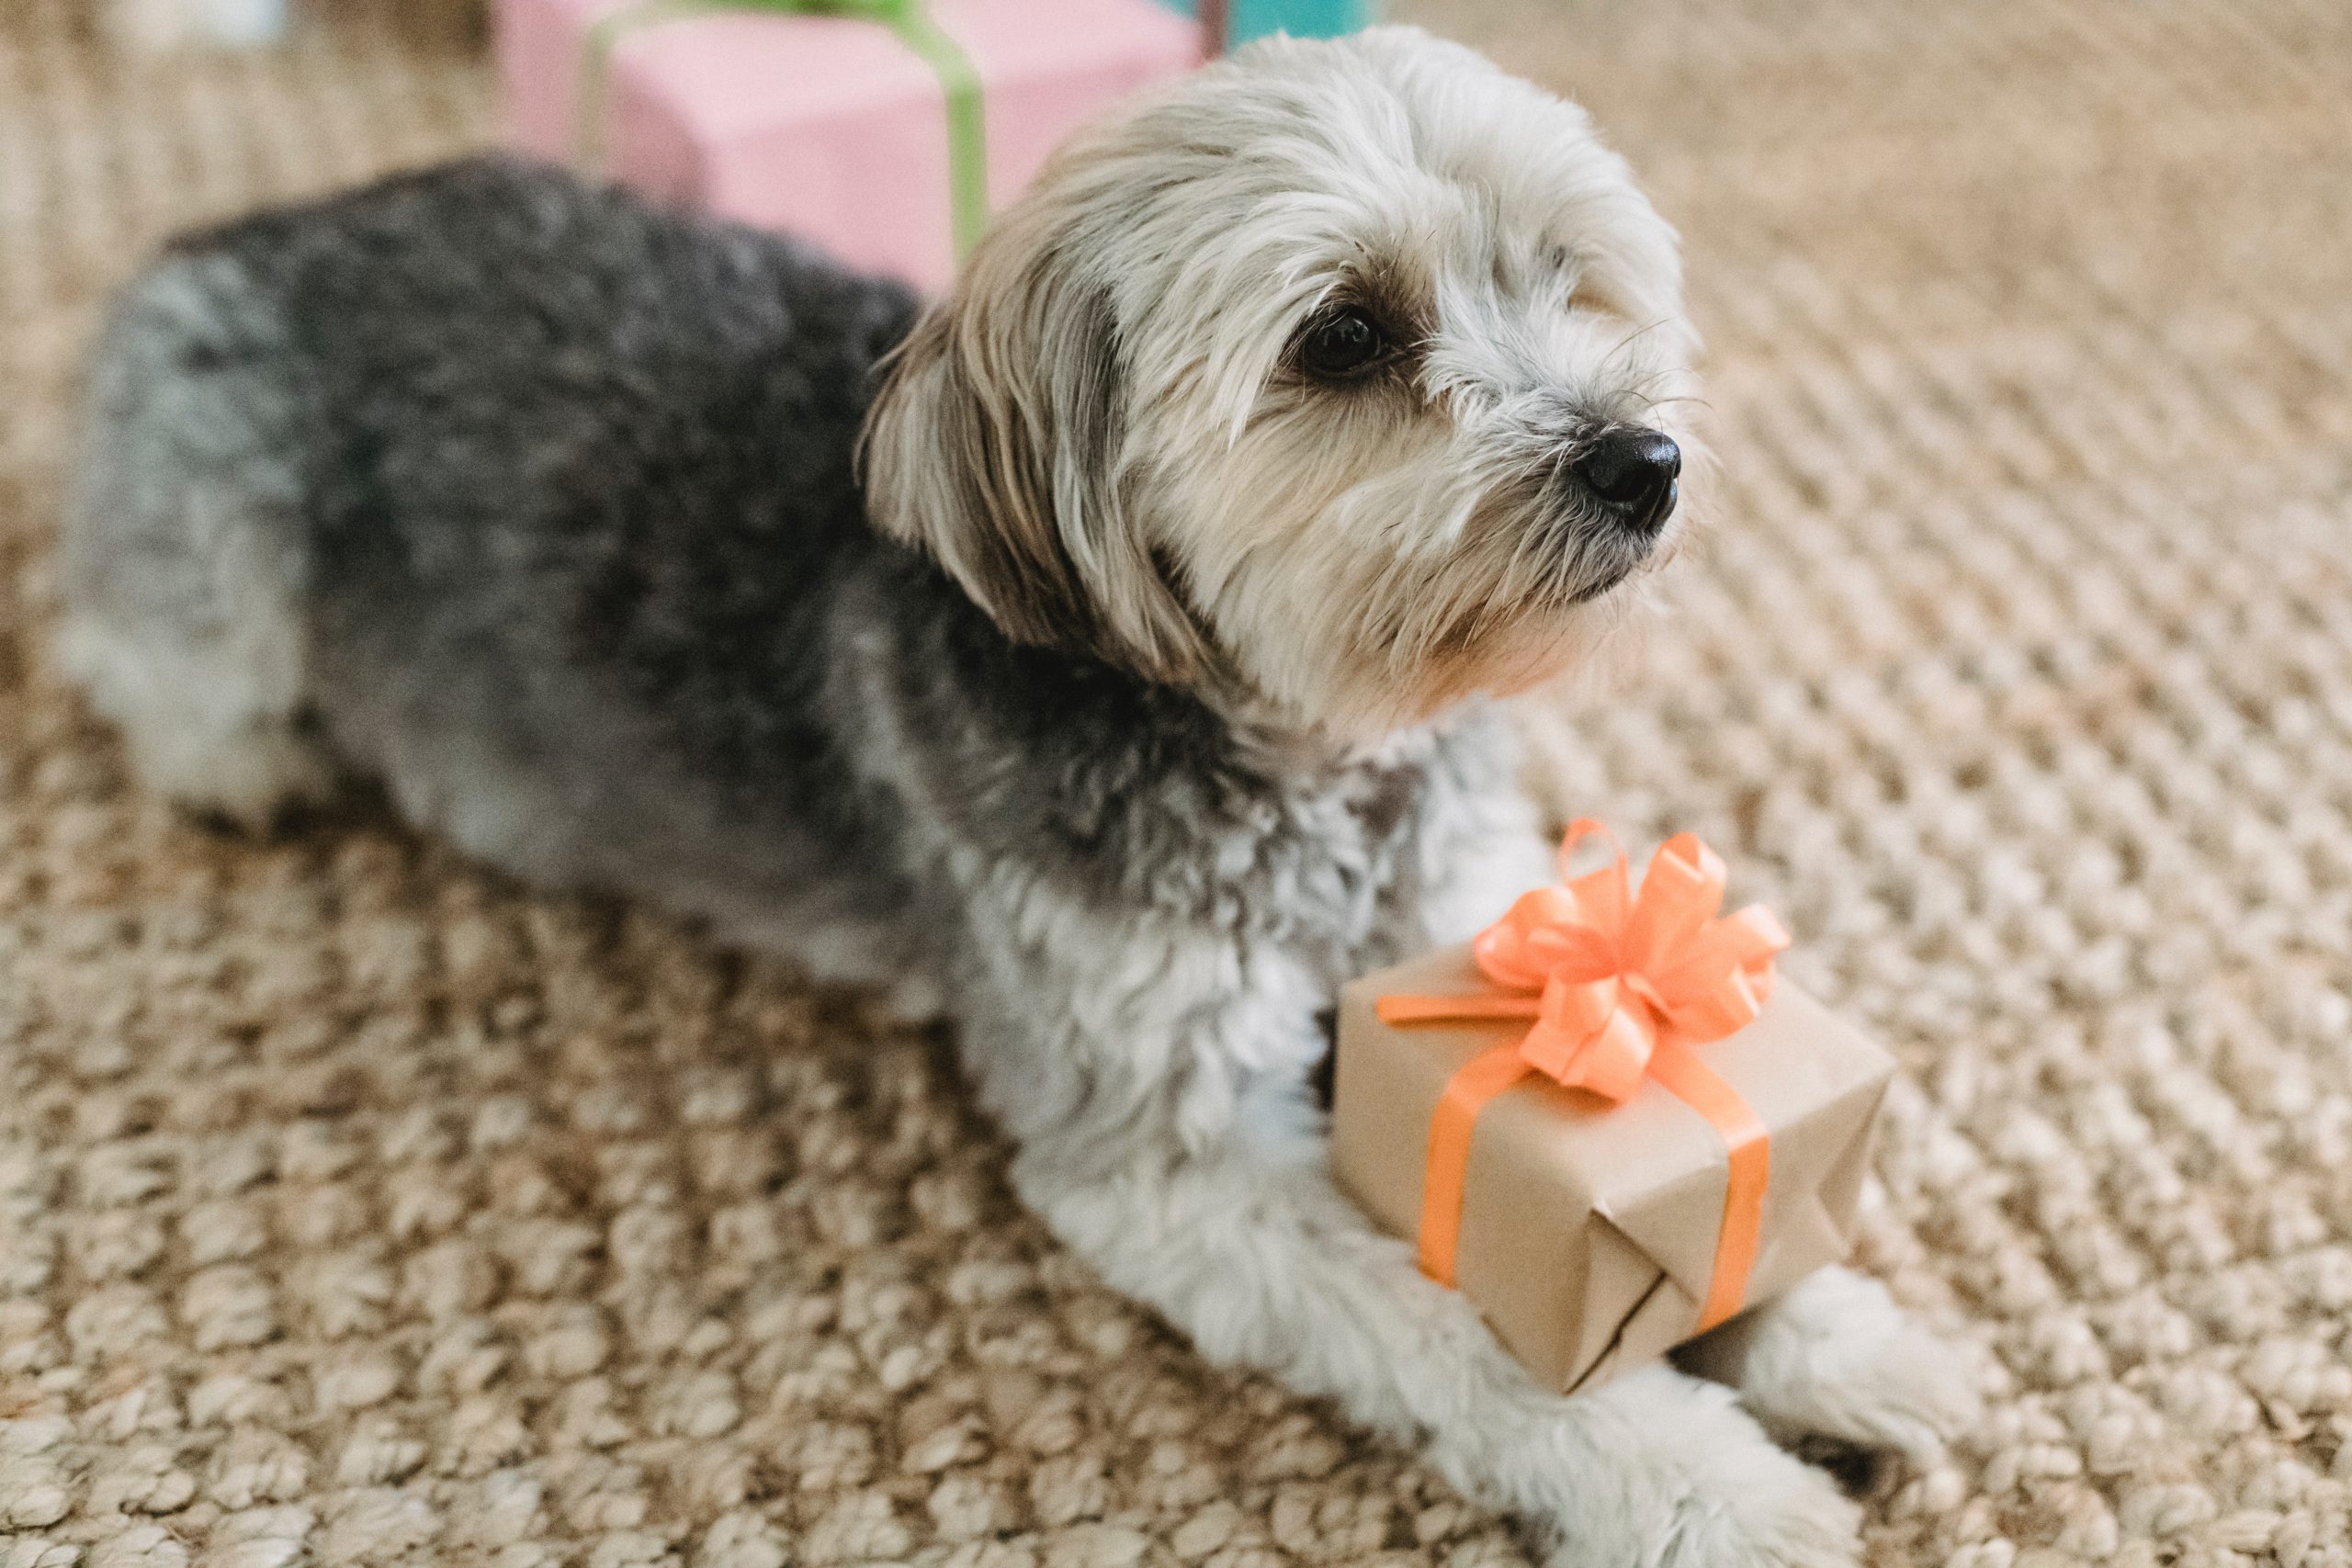 10 Amazing Gifts for Pets and Their Owners